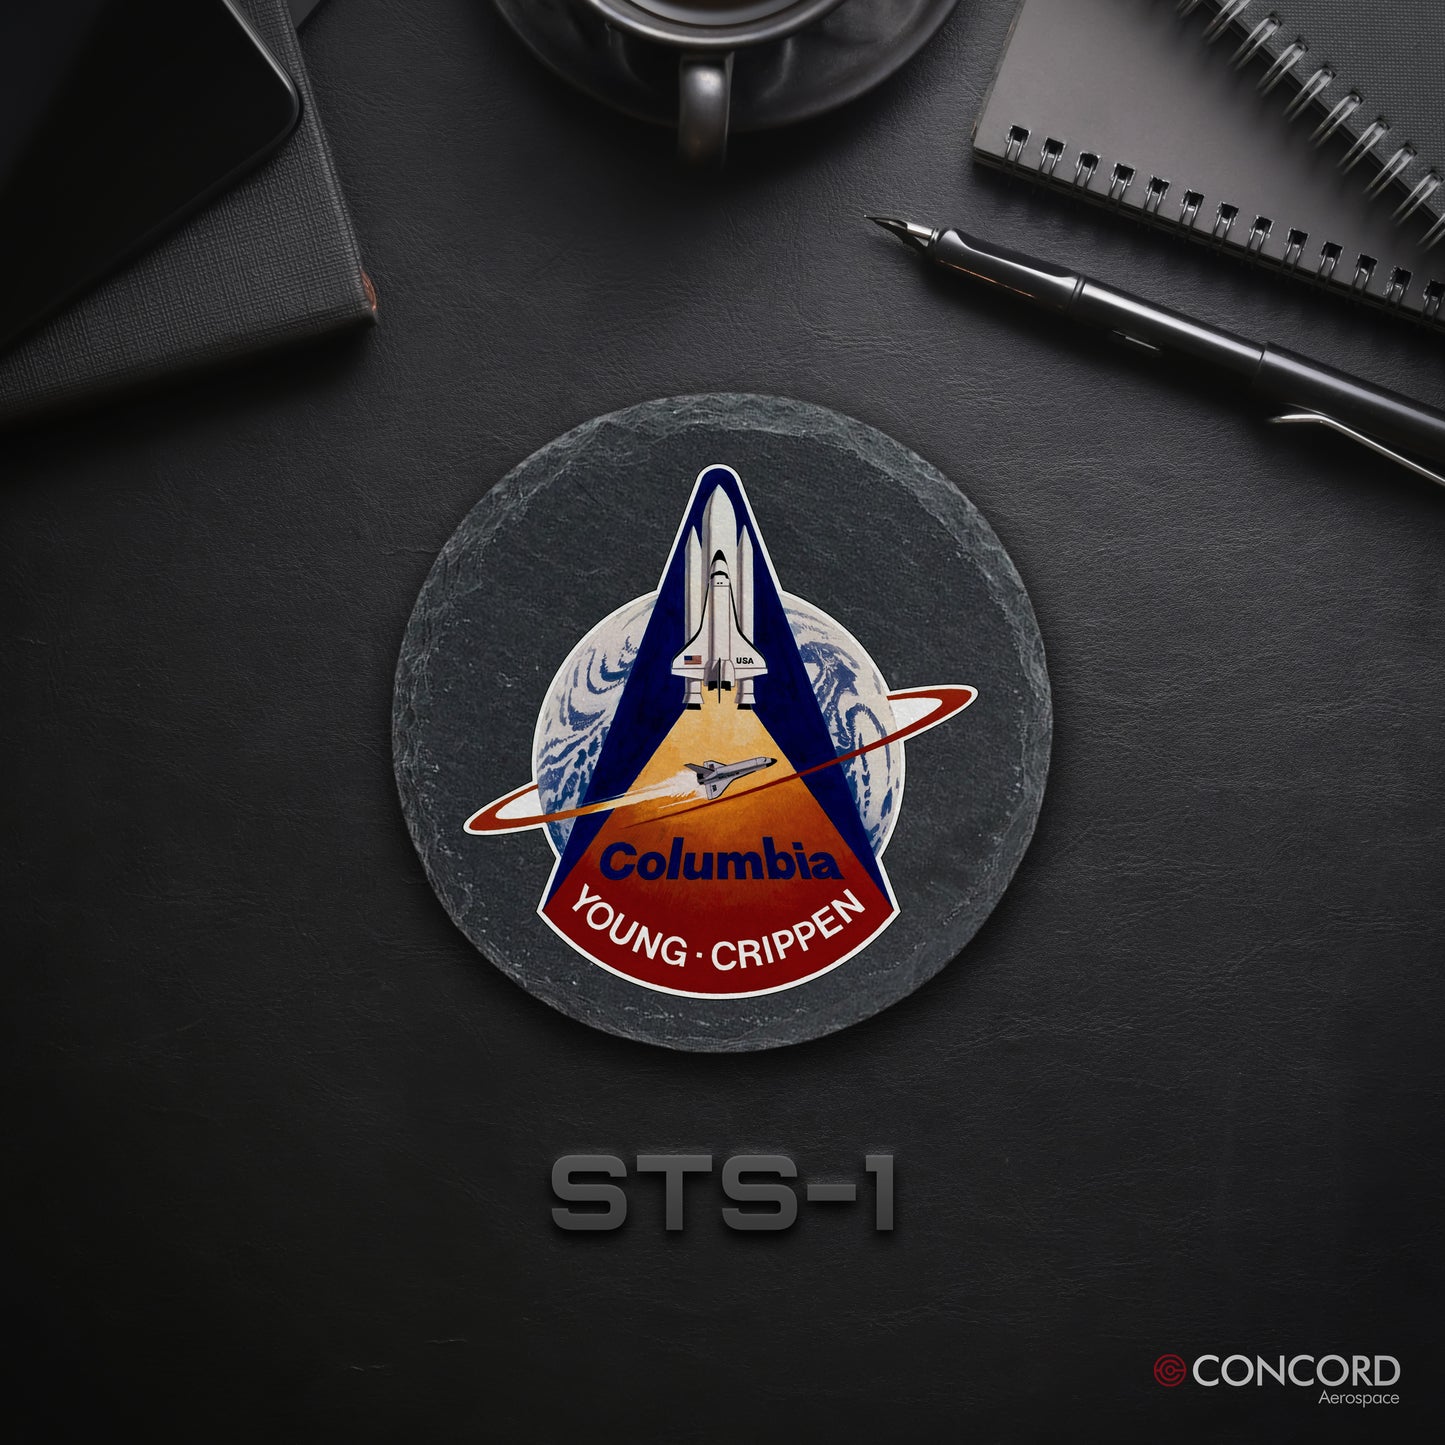 STS - 1 SPACE SHUTTLE - SLATE COASTER - Concord Aerospace Concord Aerospace Concord Aerospace Coasters